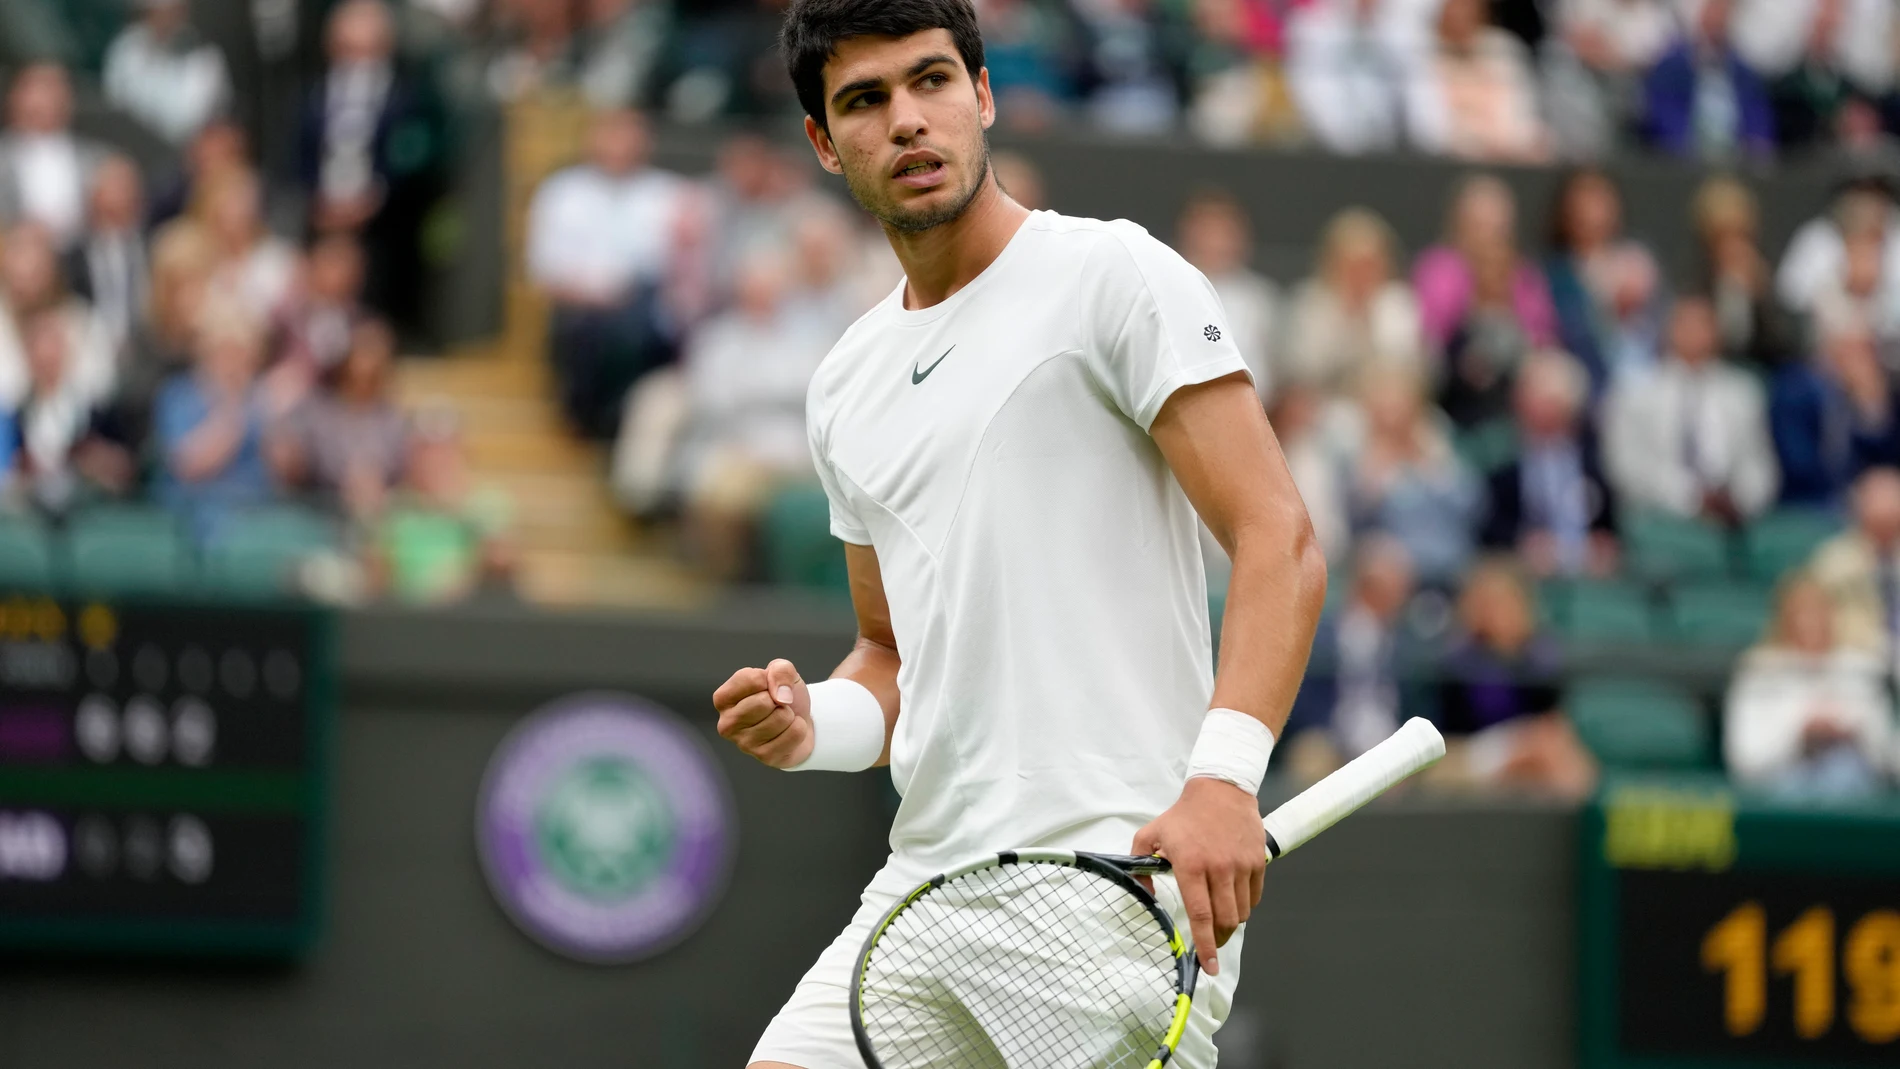 Spain's Carlos Alcaraz celebrates after winning a point against Jeremy Chardy of France in a first round men's singles match on day two of the Wimbledon tennis championships in London, Tuesday, July 4, 2023. (AP Photo/Kirsty Wigglesworth)